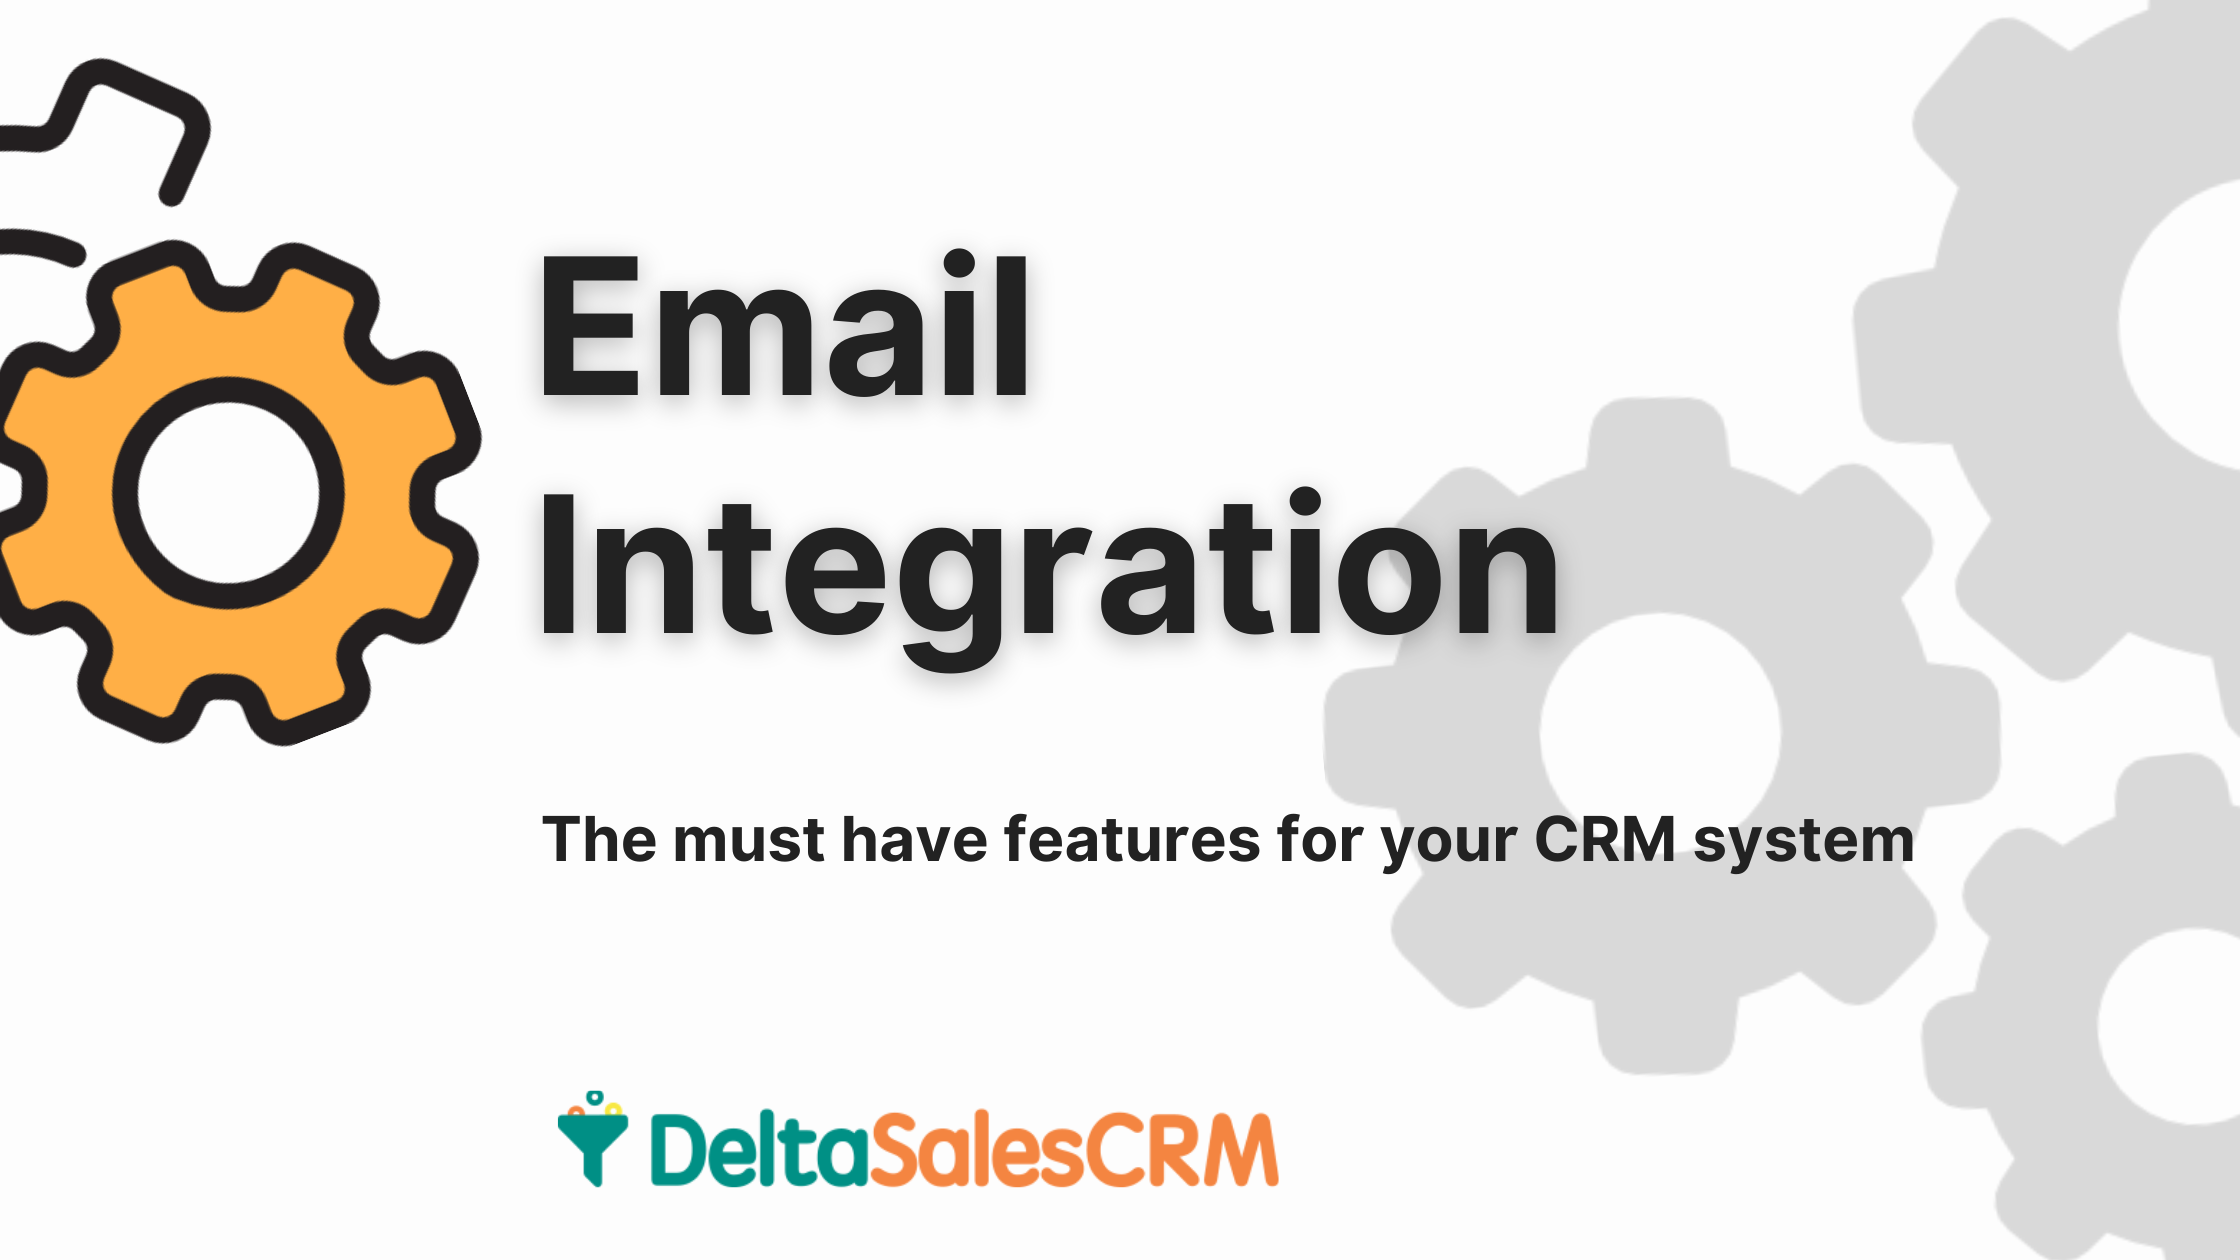 Why is Email Integration important for your CRM?